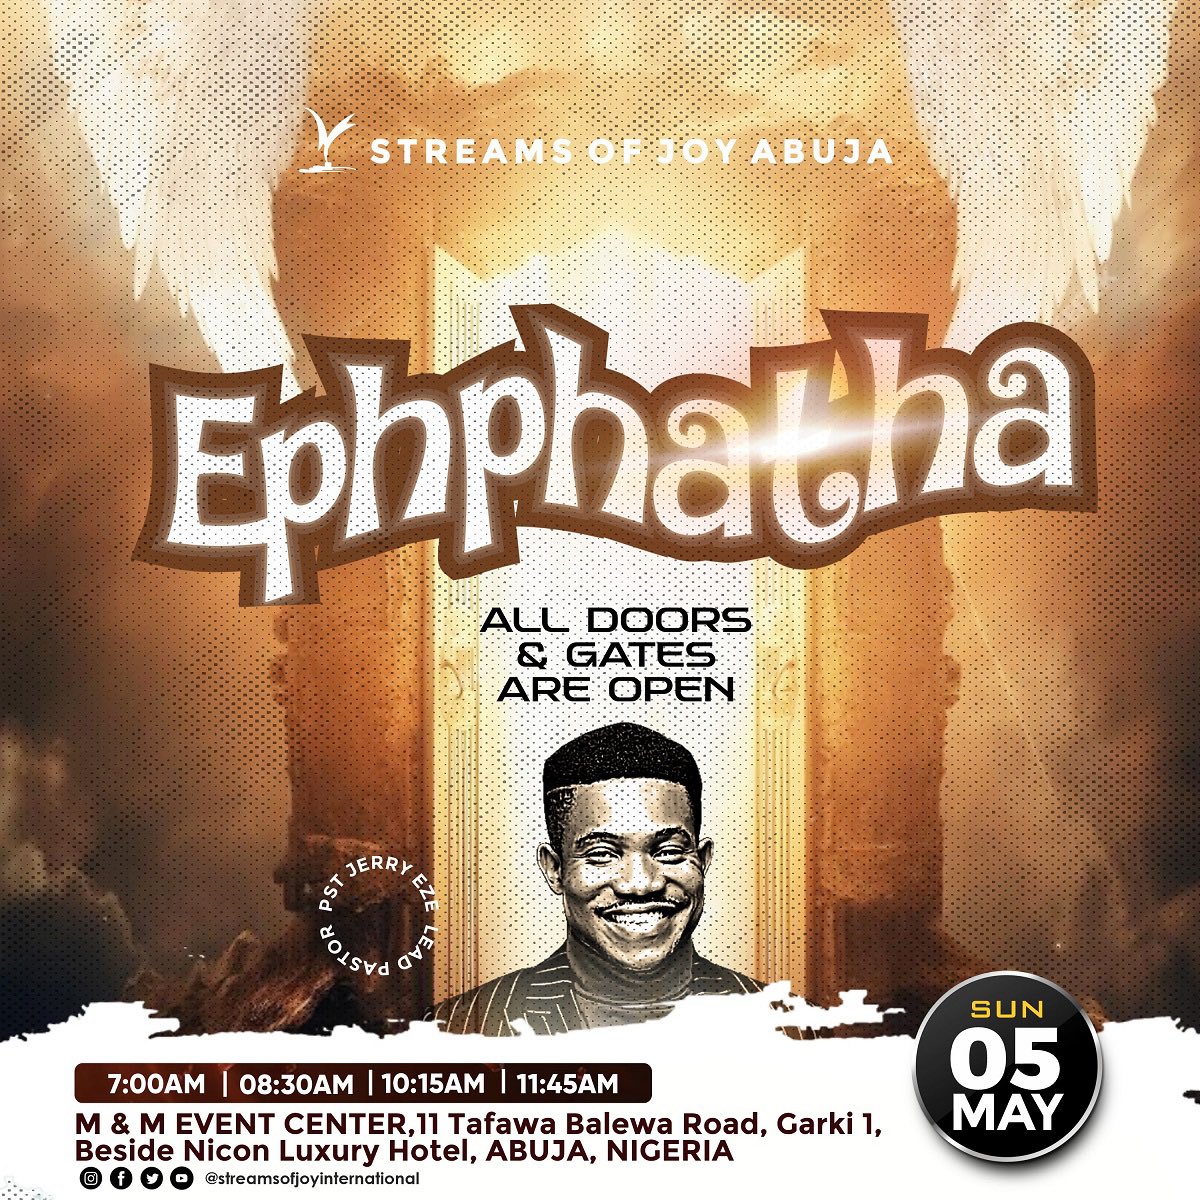 Who is getting Ready for Service this Morning ??? FIREFUL SERVICE 🔥🔥🔥 Somebody Thunder - EPHPHATHA